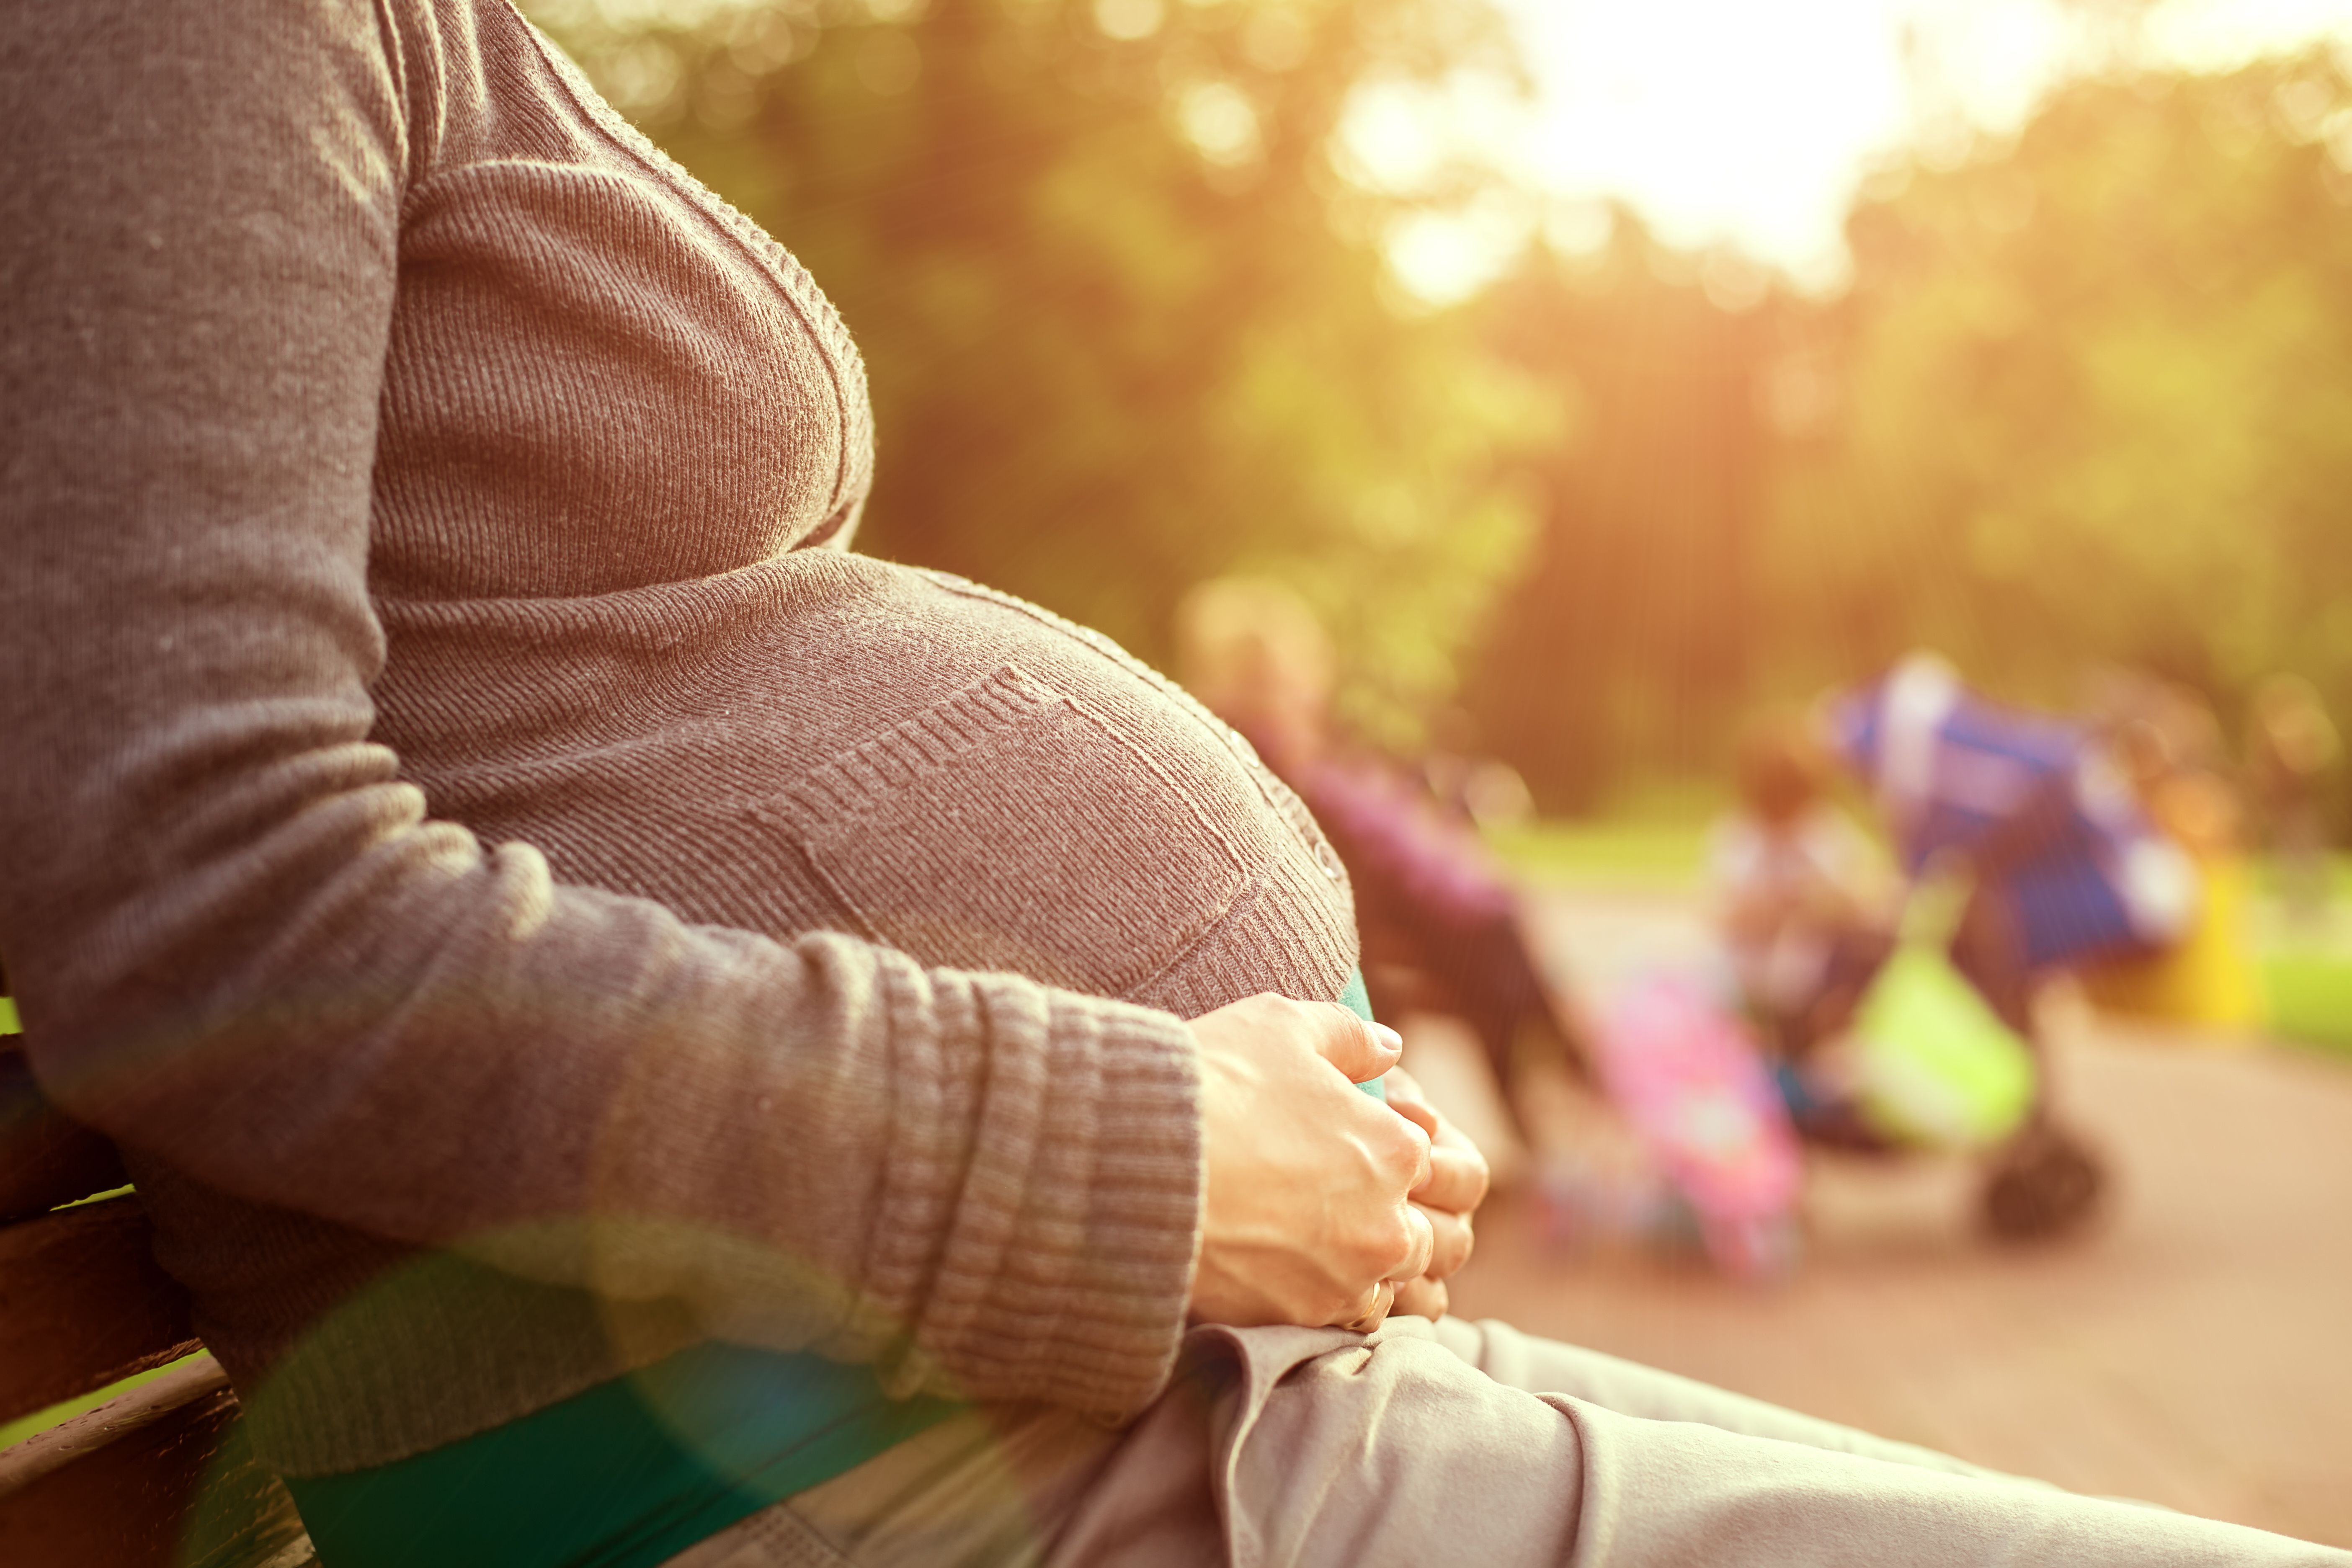 A pregnant woman in the park, holding her growing belly. | Source: Shutterstock